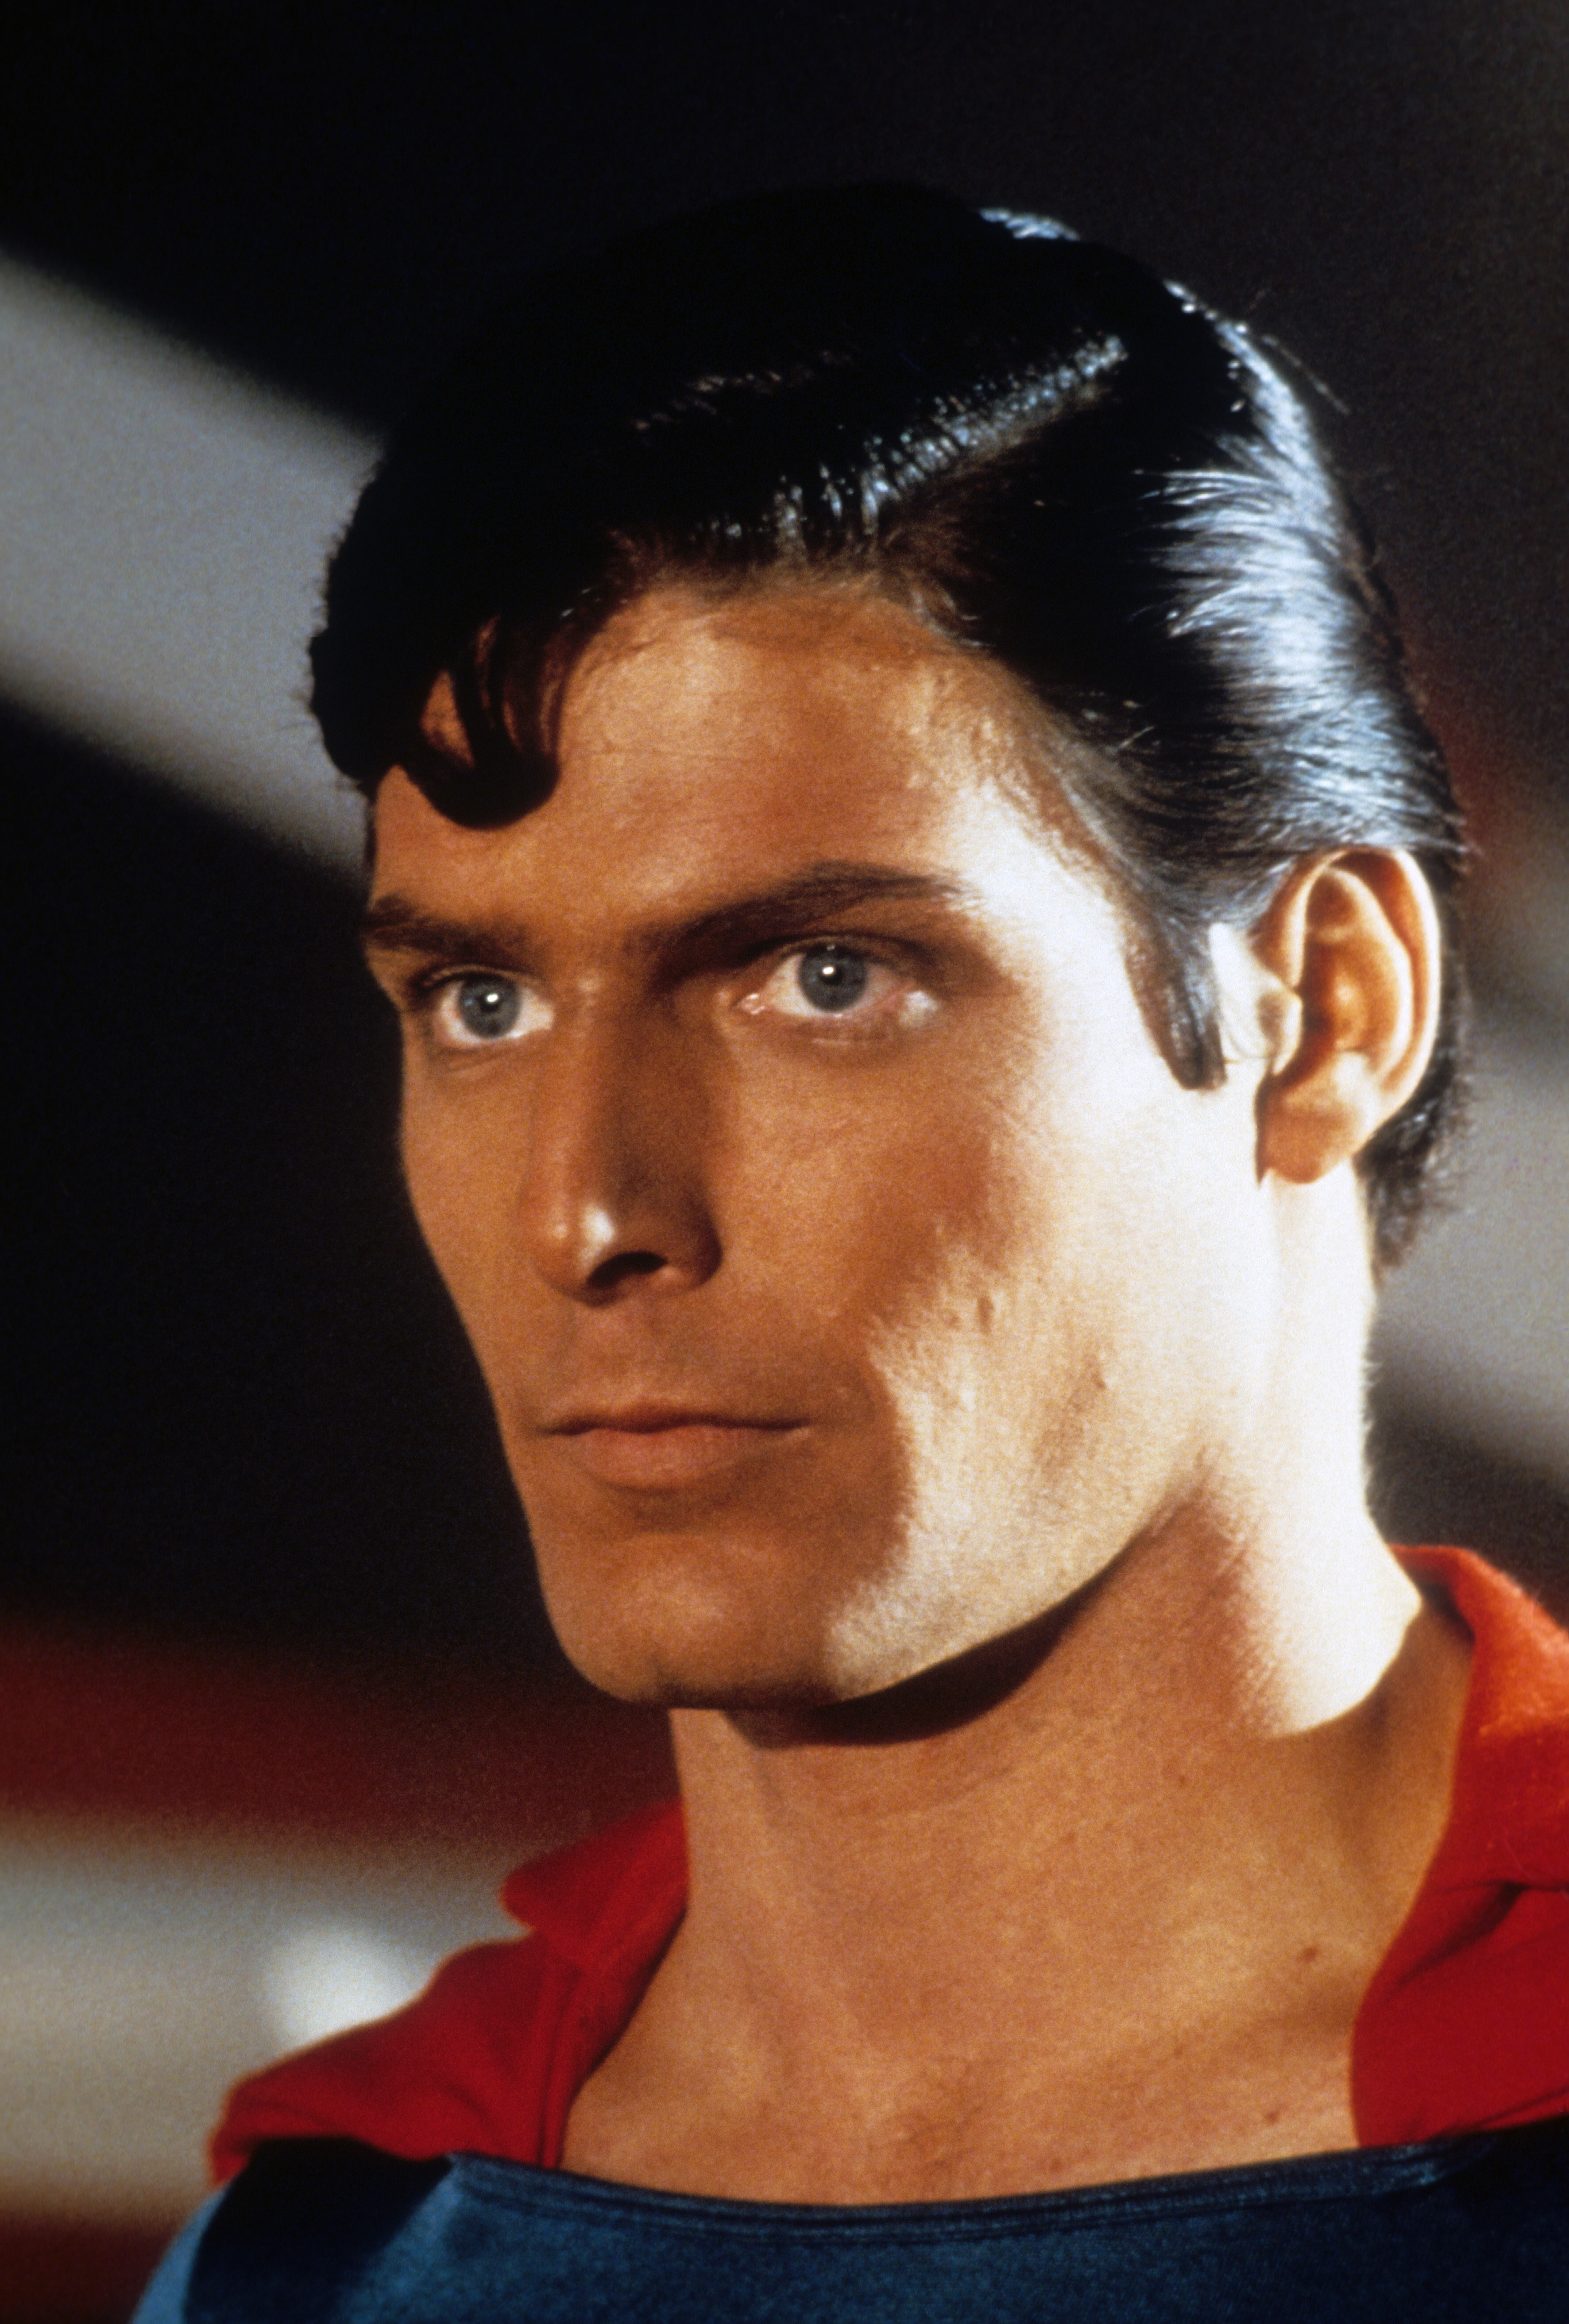 Christopher Reeve starred as Superman in the 1978 film of the same name